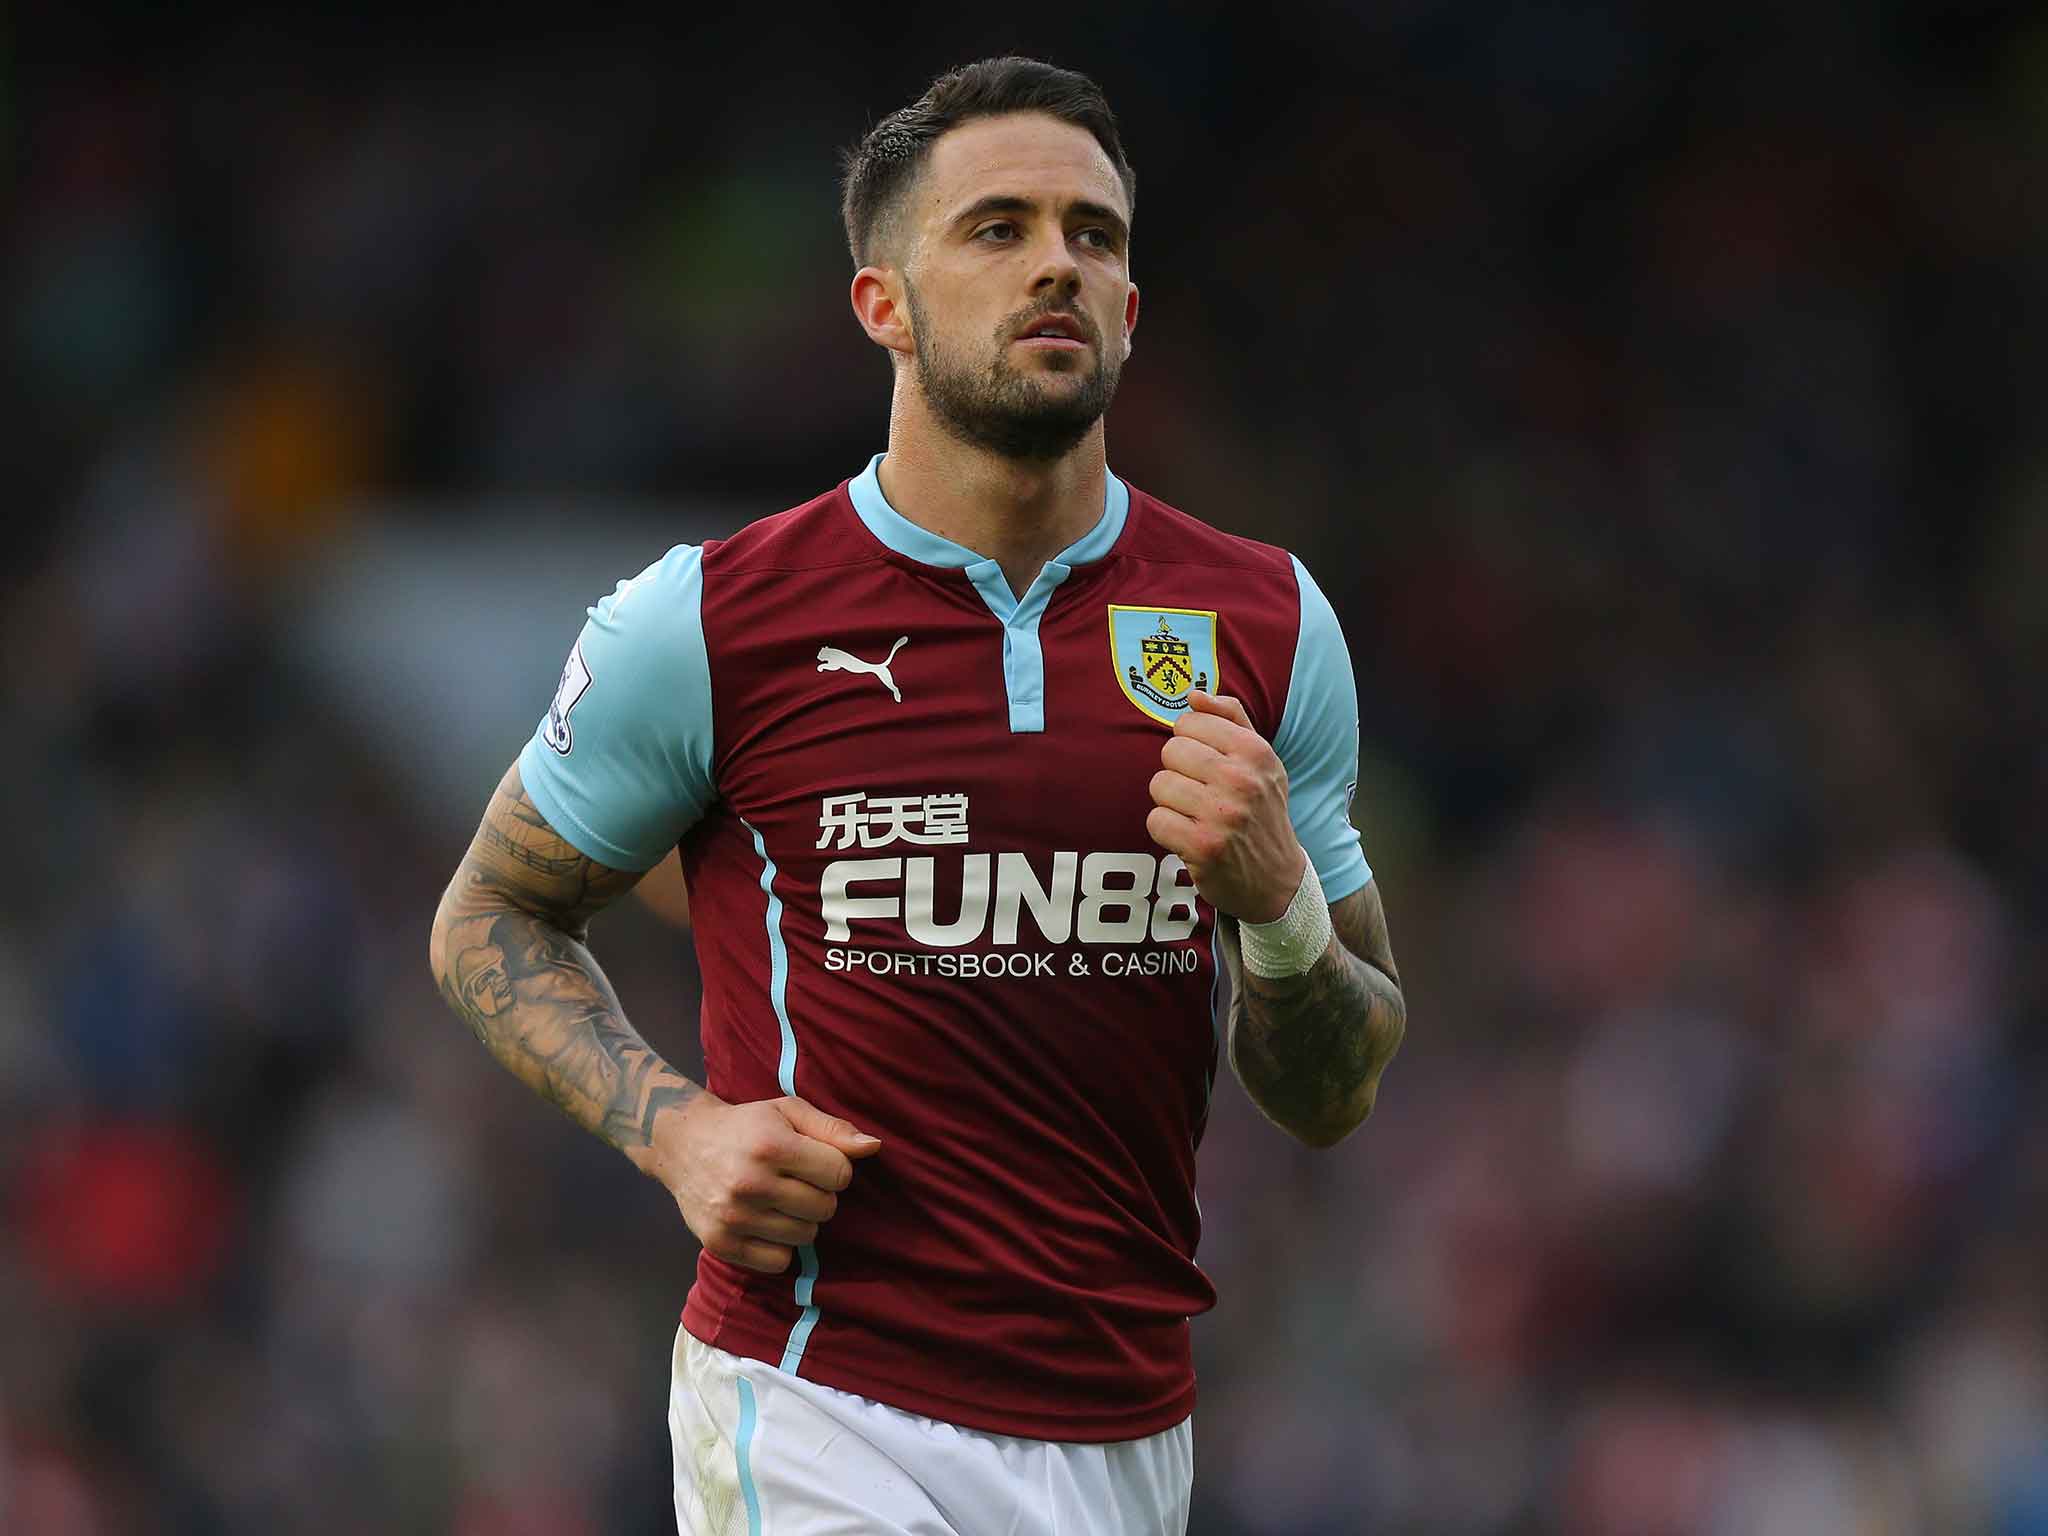 Burnley striker Danny Ings has agreed to join Liverpool